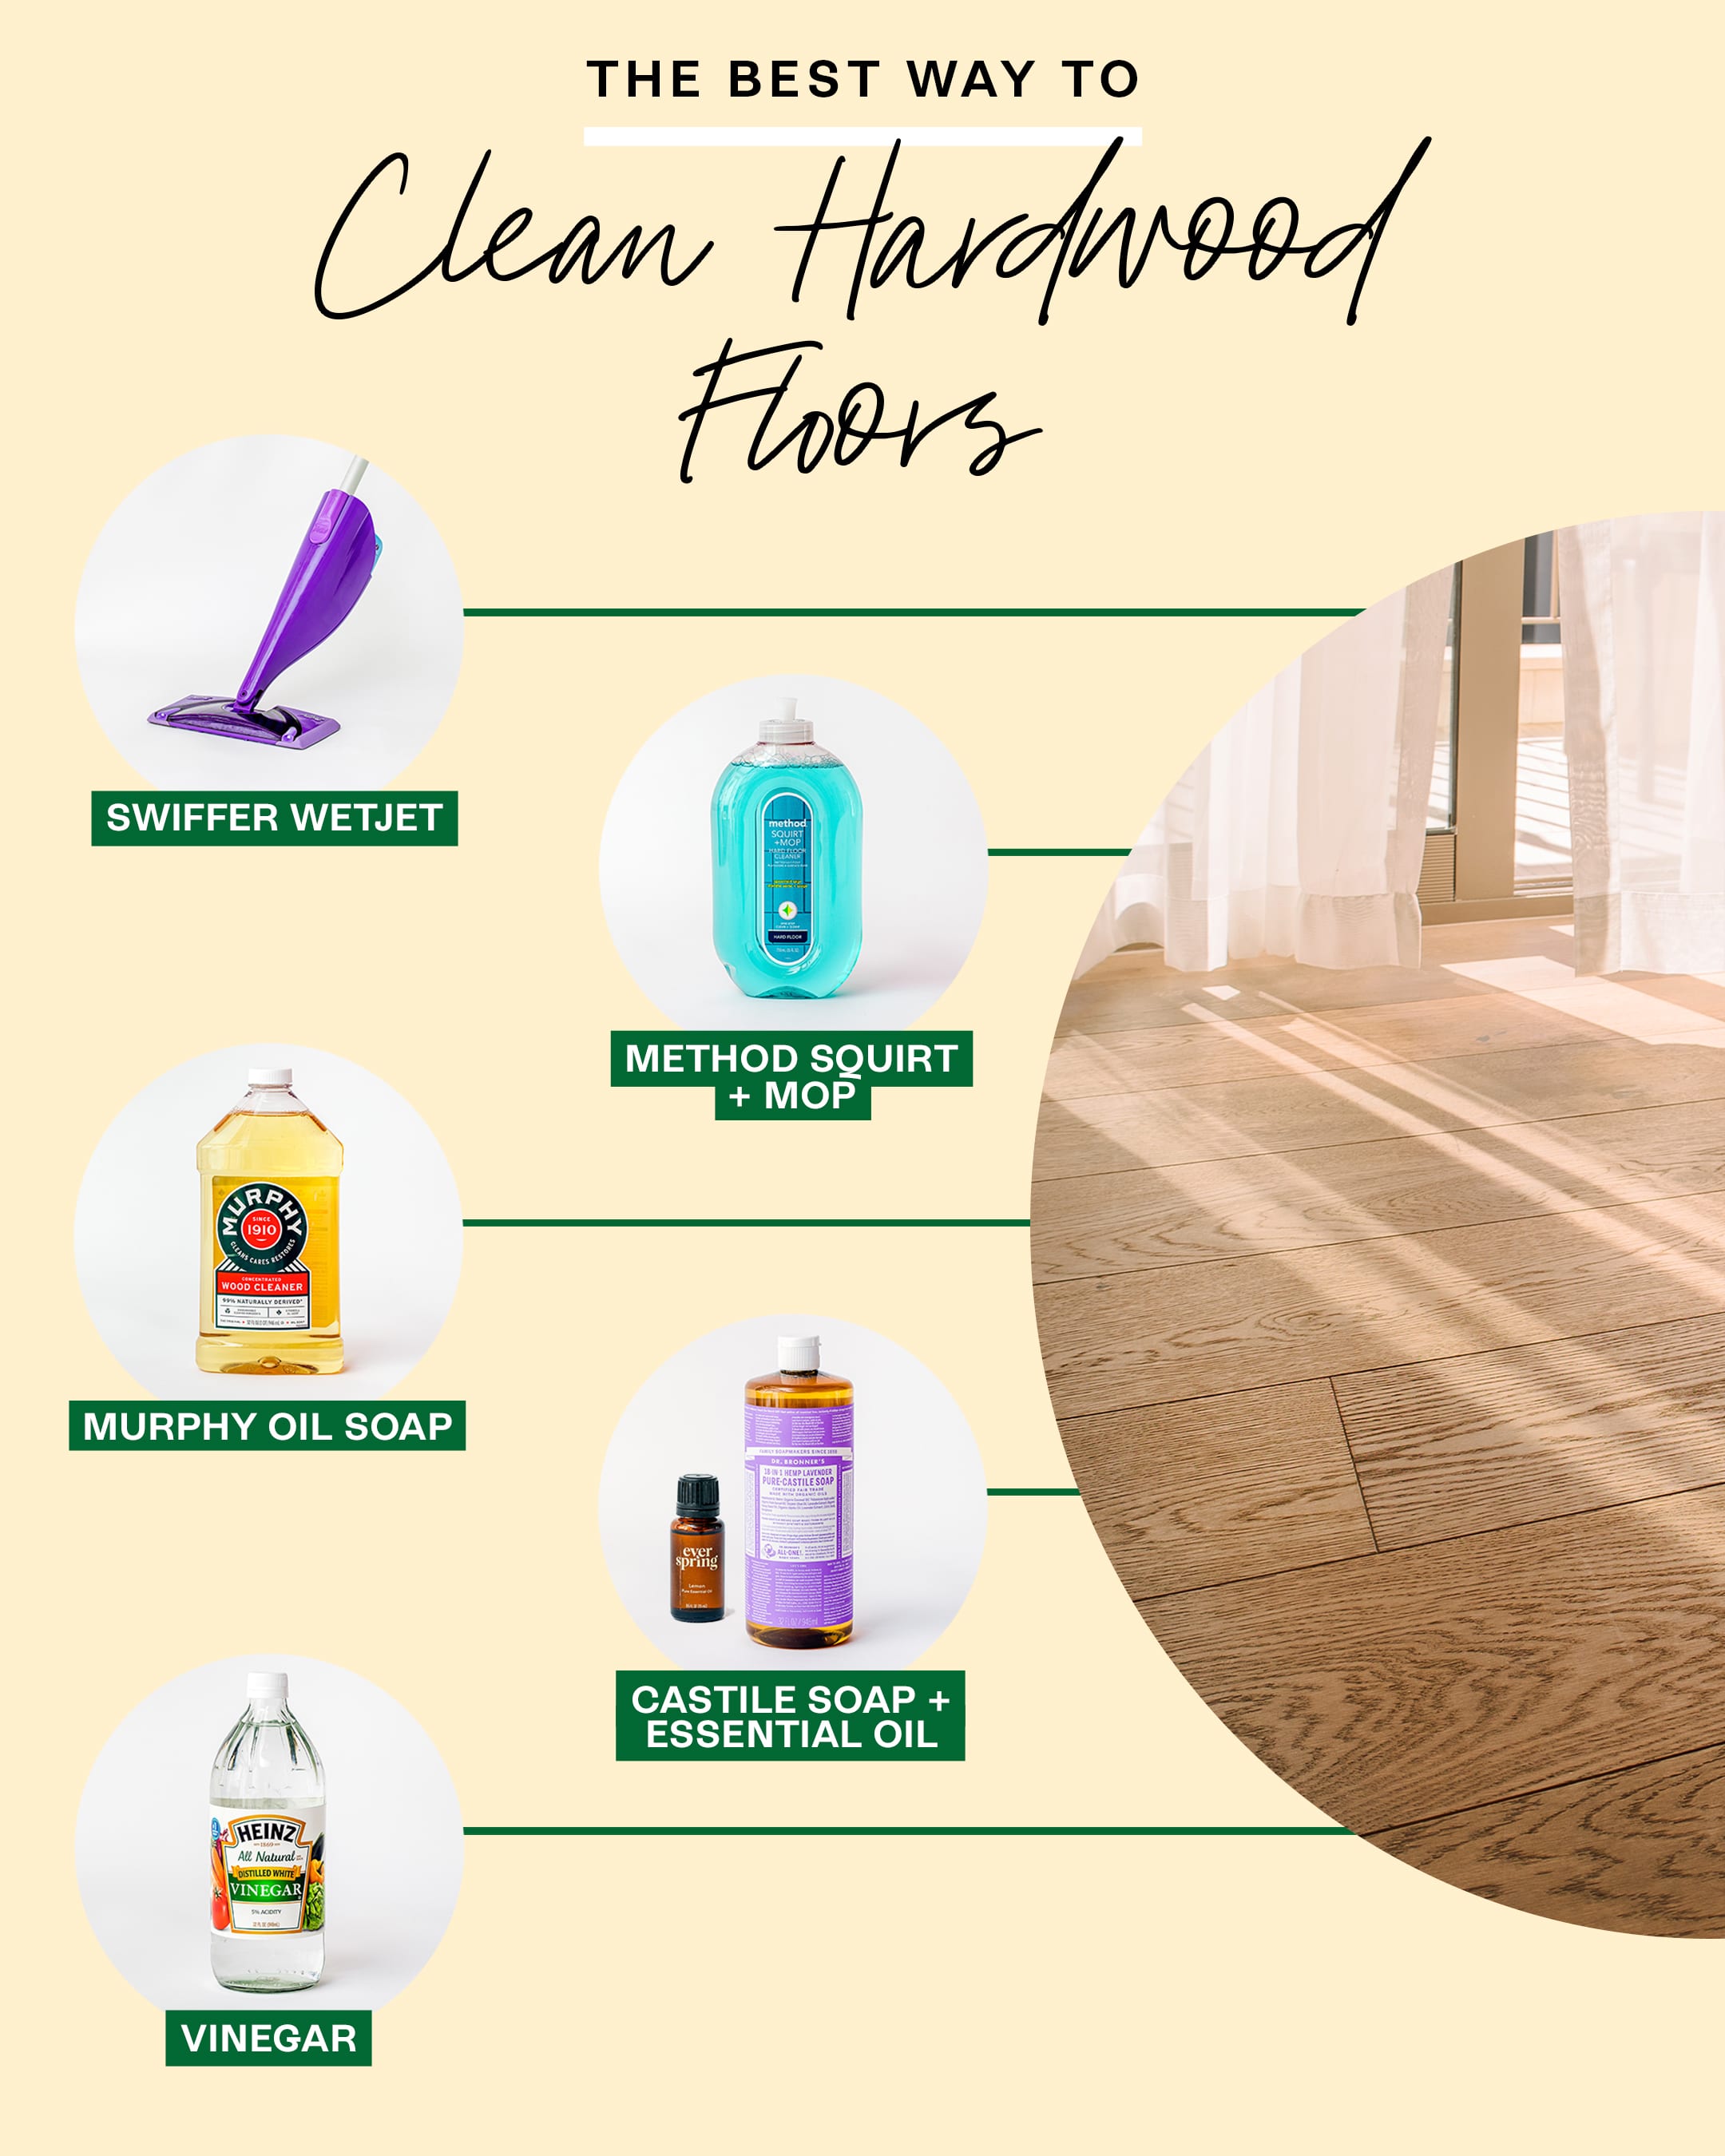 The Best Way to Clean Hardwood Floors (Tested & Approved)